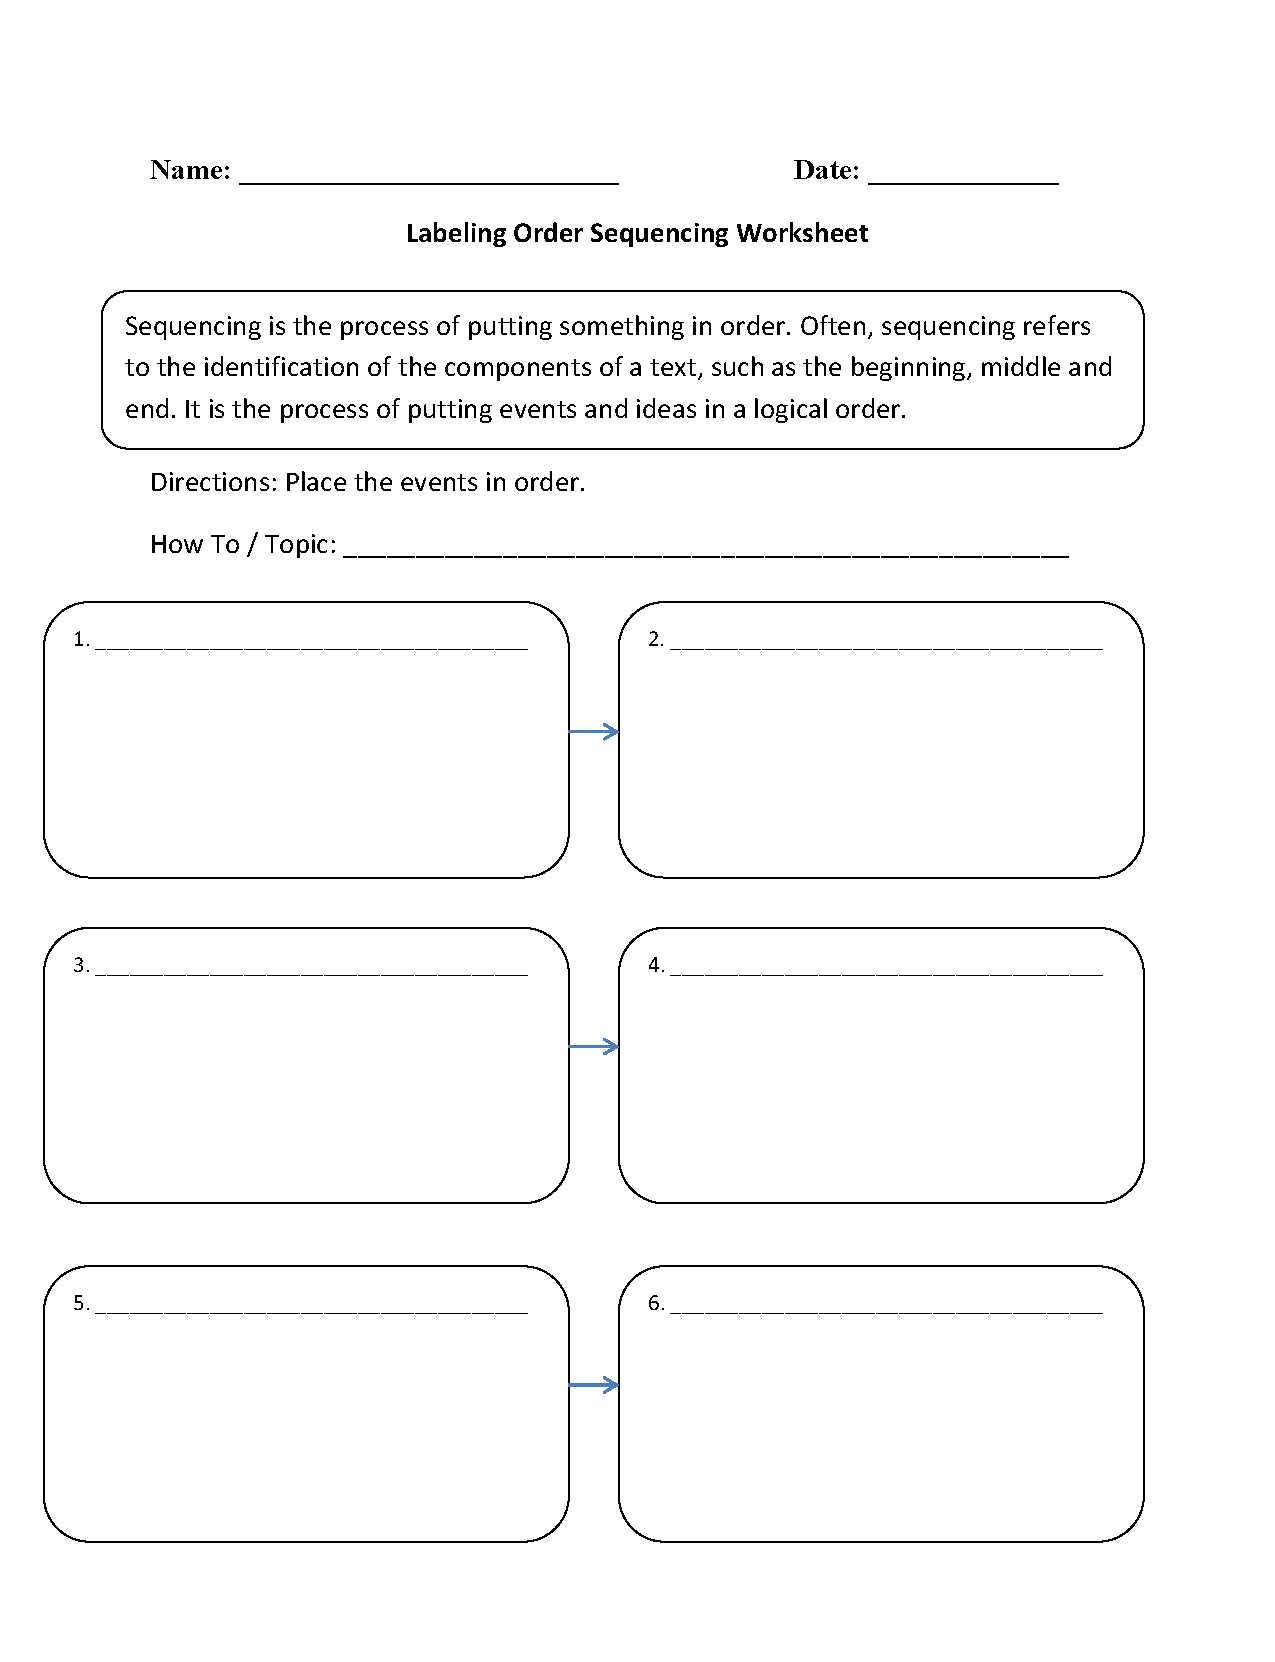 Independent Practice Math Worksheet Answers and Sequence events Worksheets 6th Grade Sequencing